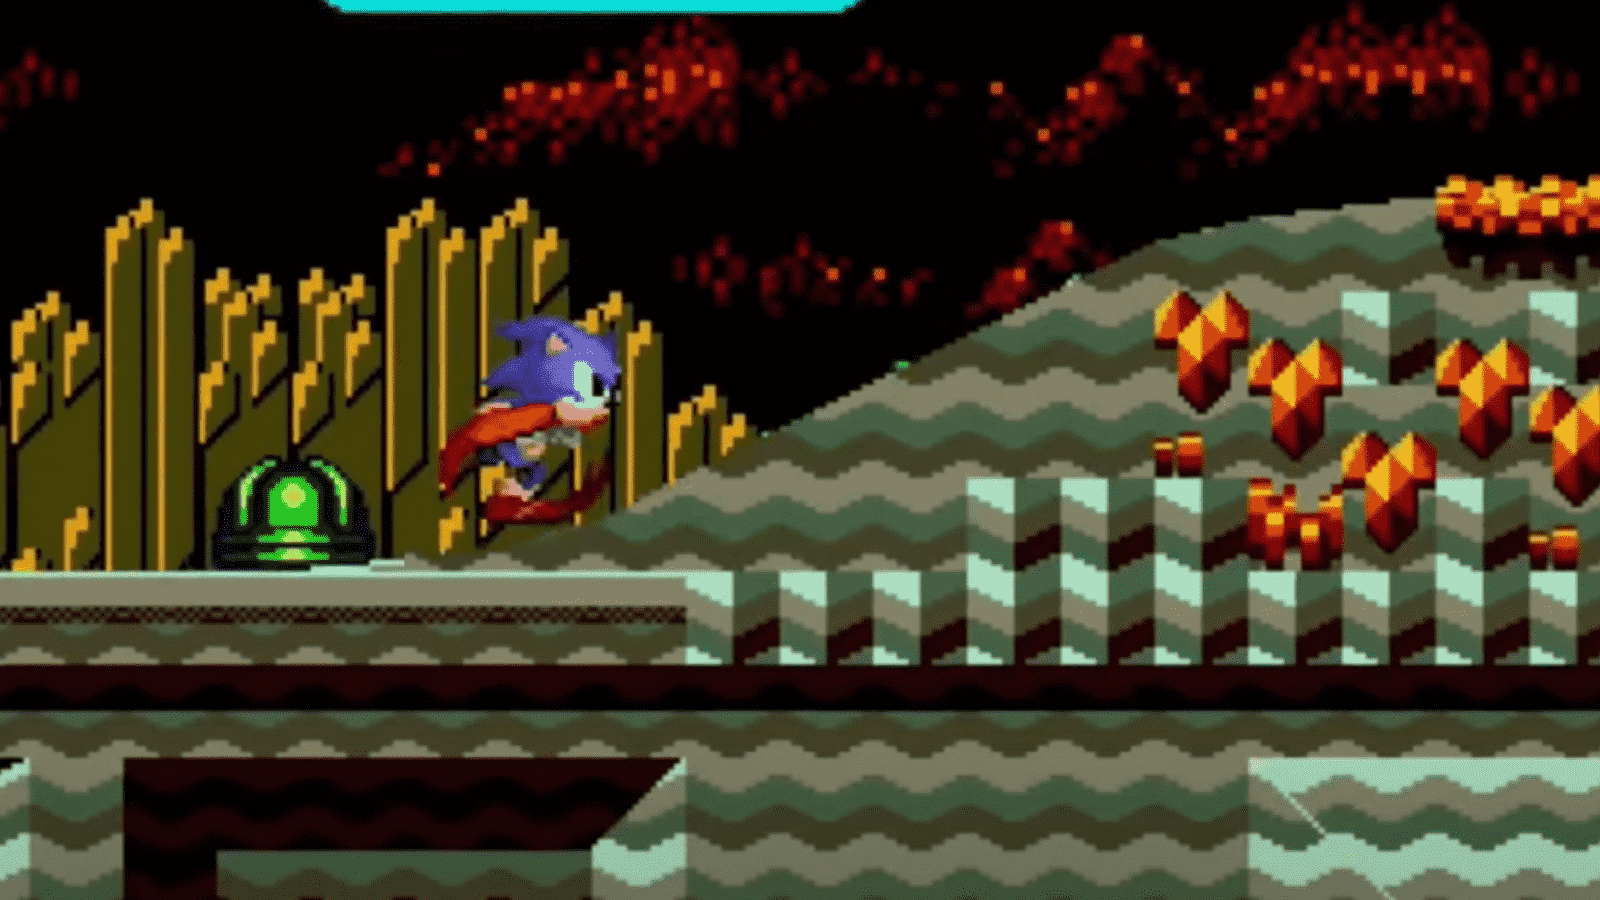 Gameplay from Sonic CD, played on a Nintendo Switch